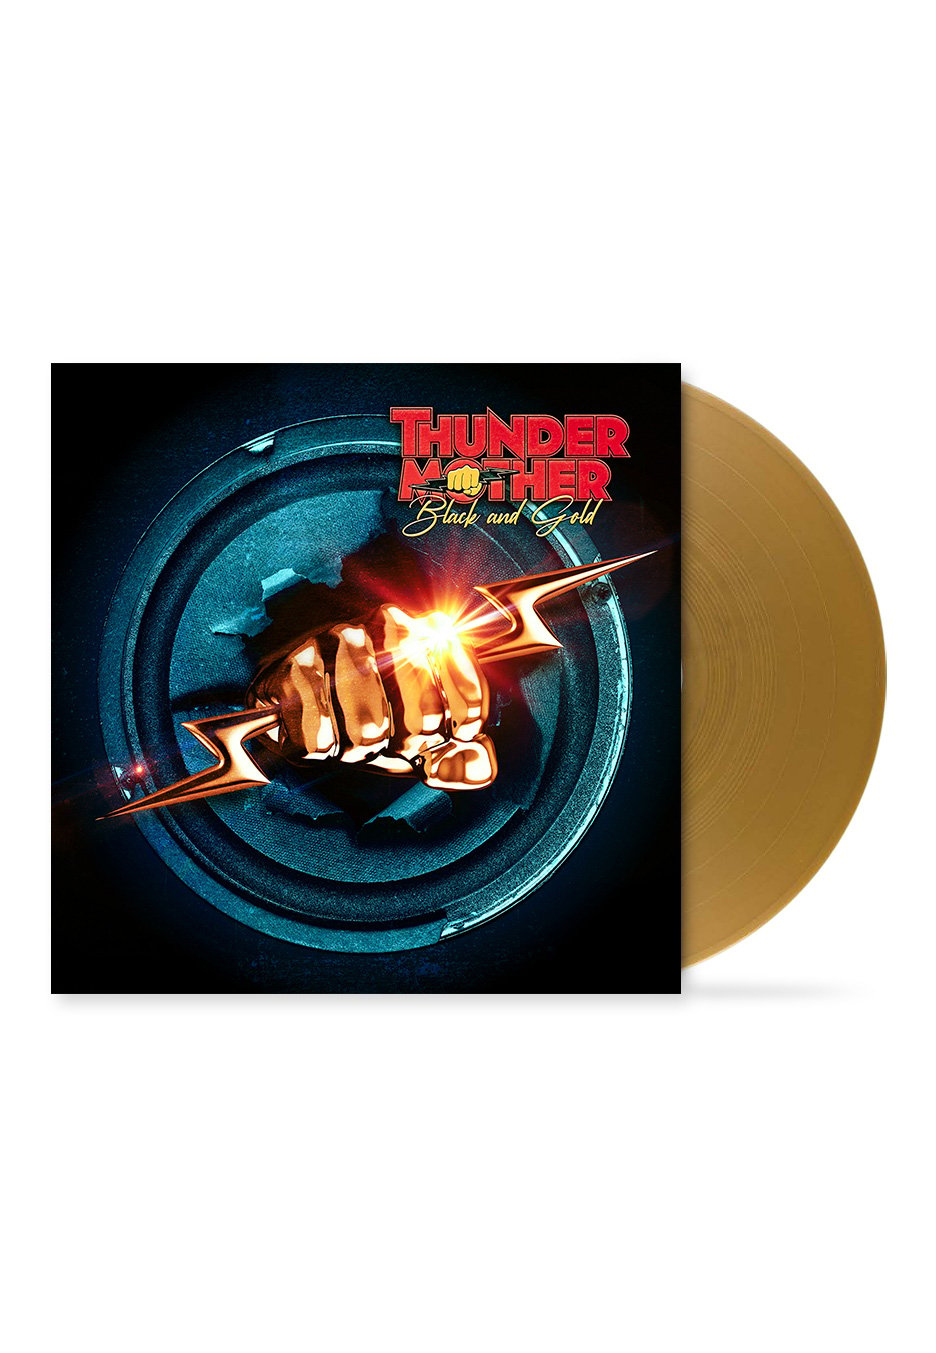 Thundermother - Black And Gold Ltd. Gold - Colored Vinyl